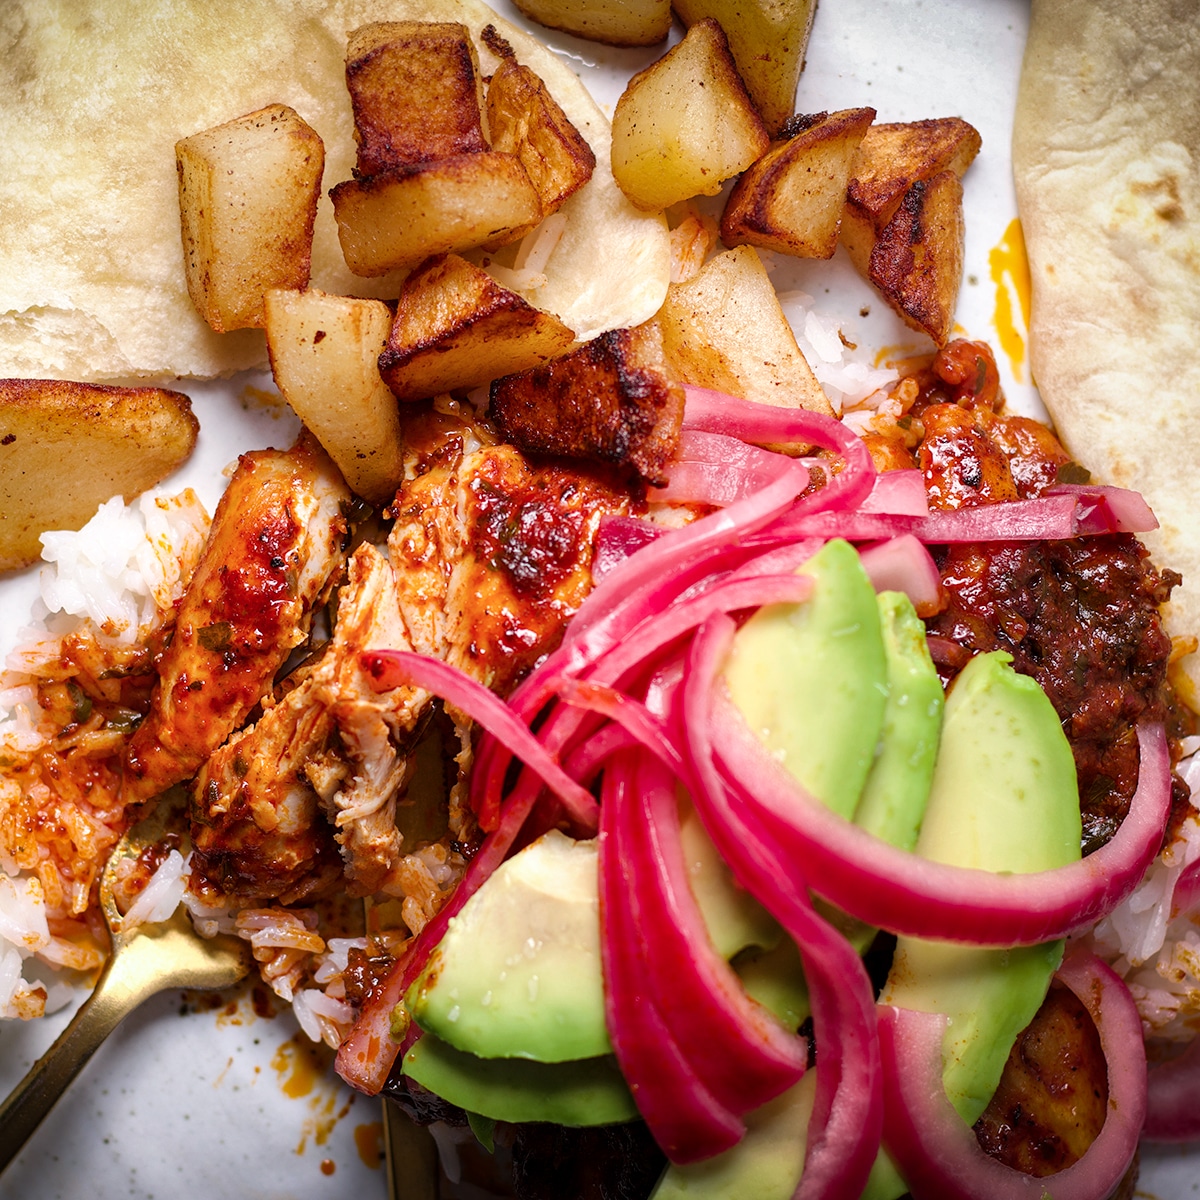 A photo looking down onto a plate of Mexican Adobo Chicken served with rice, crispy fried potatoes and a flour tortilla. A fork has cut into the chicken so you can see the tender, juicy inside of the meat.